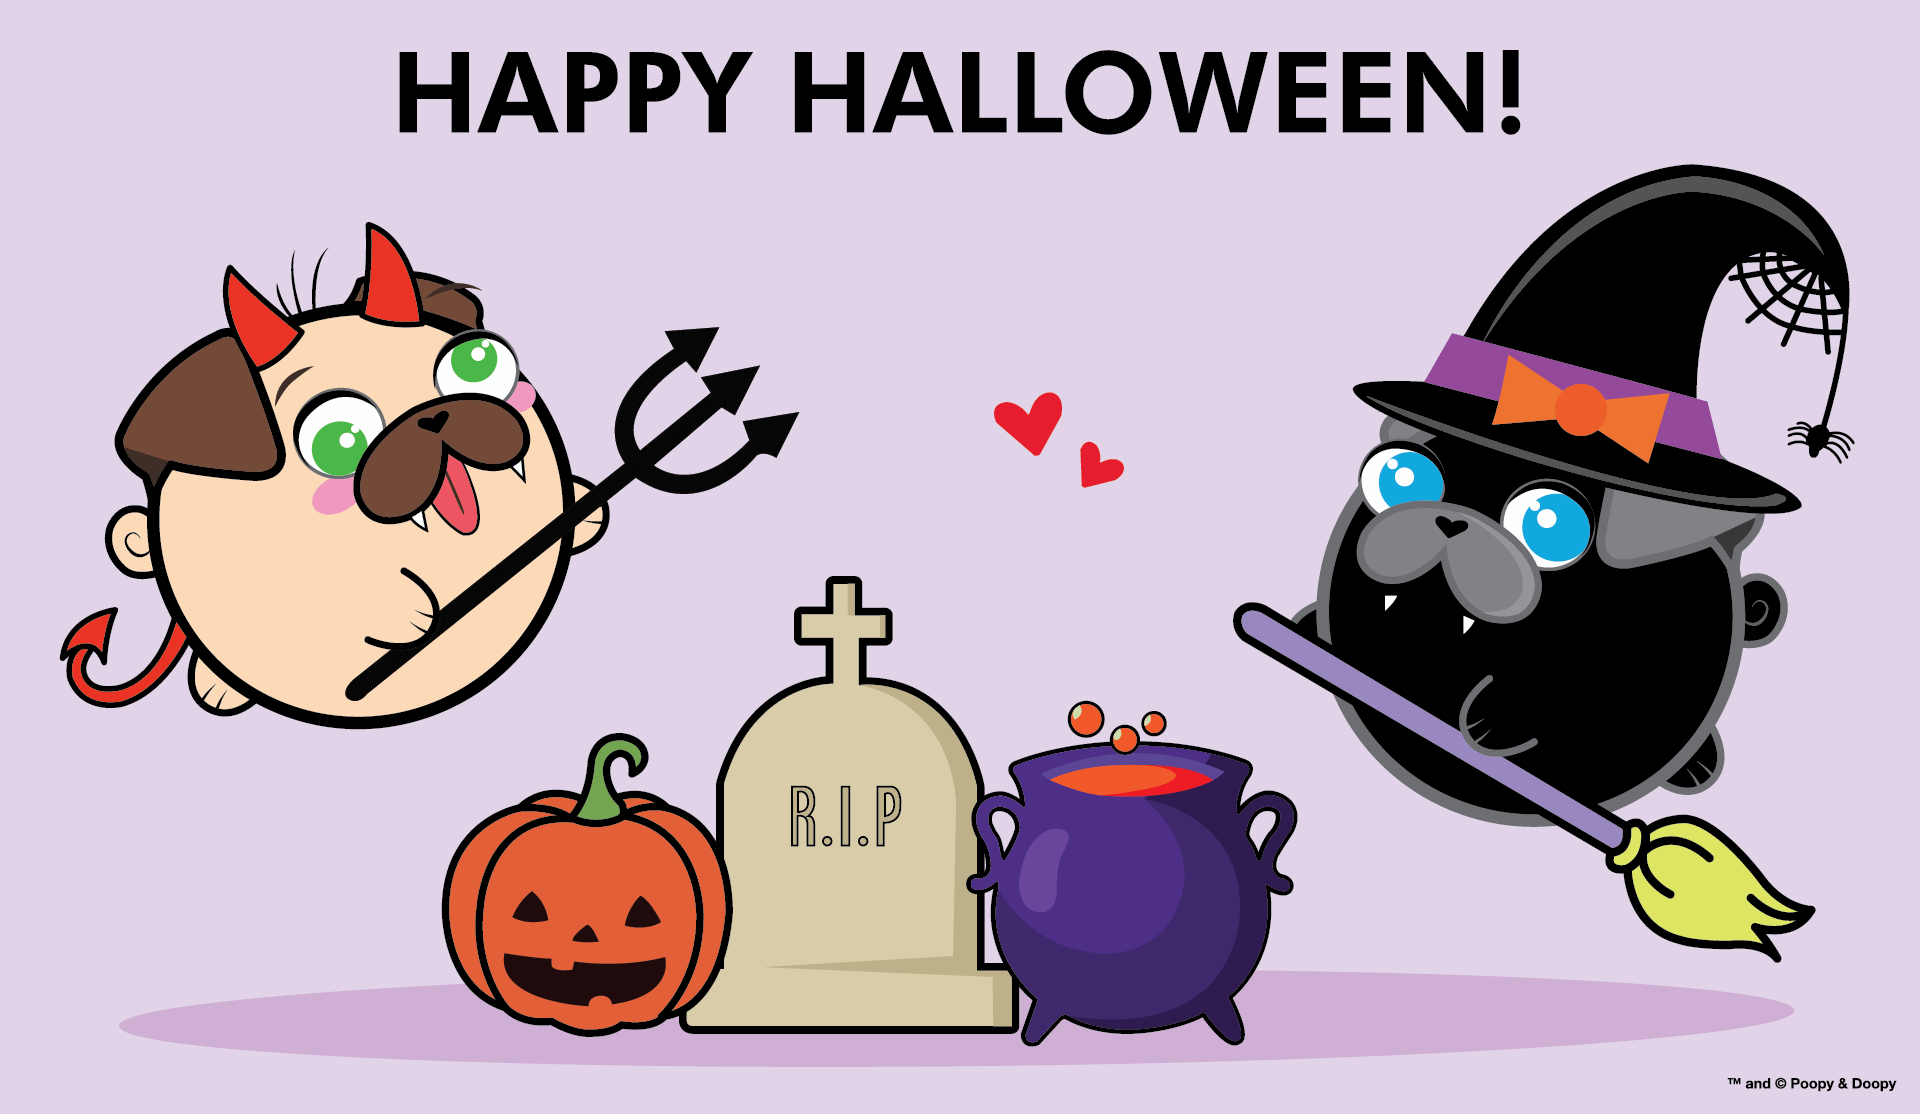 Poopy and Doopy - Halloween